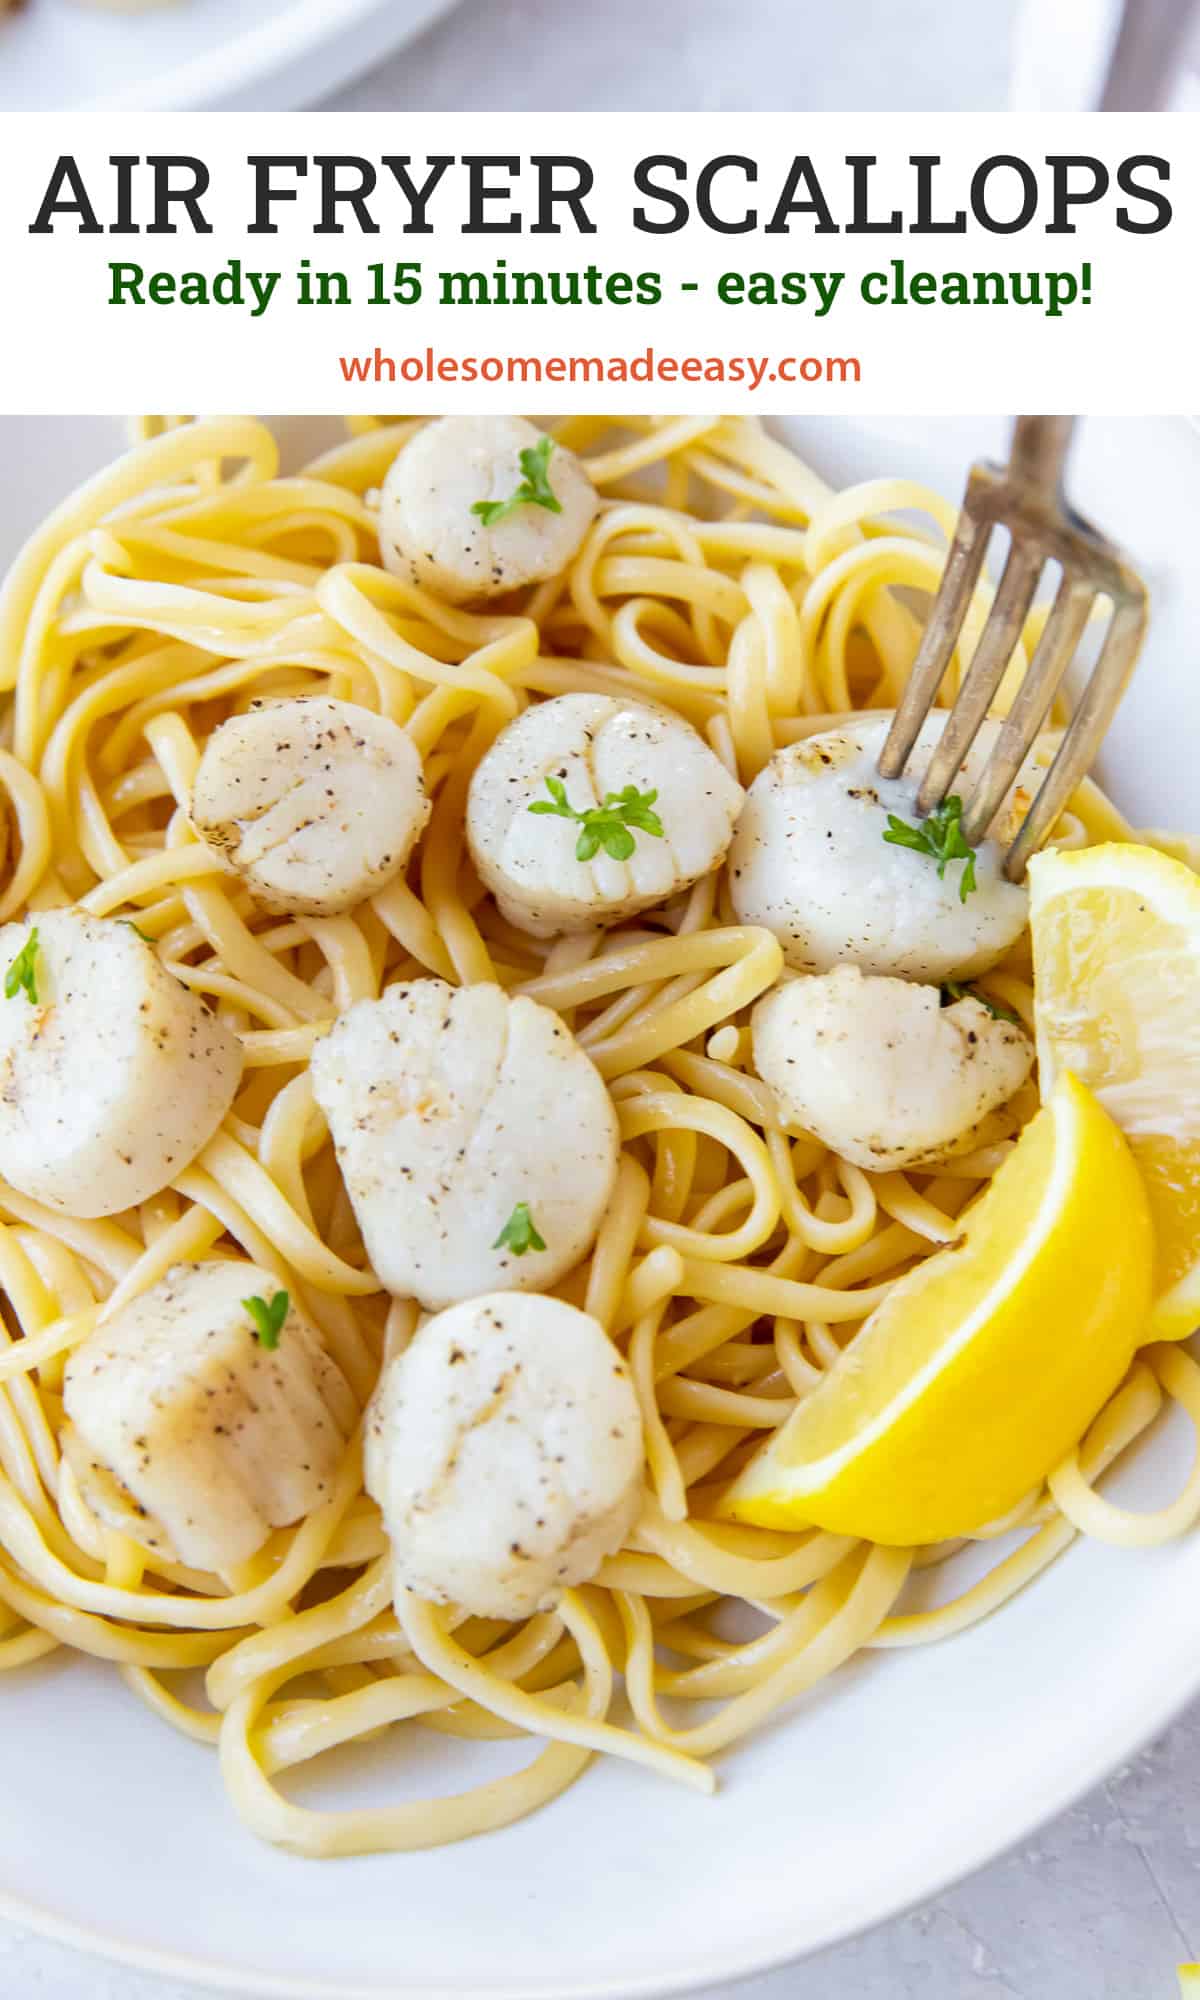 Scallops over pasta with lemon wedges in a white bowl with text.